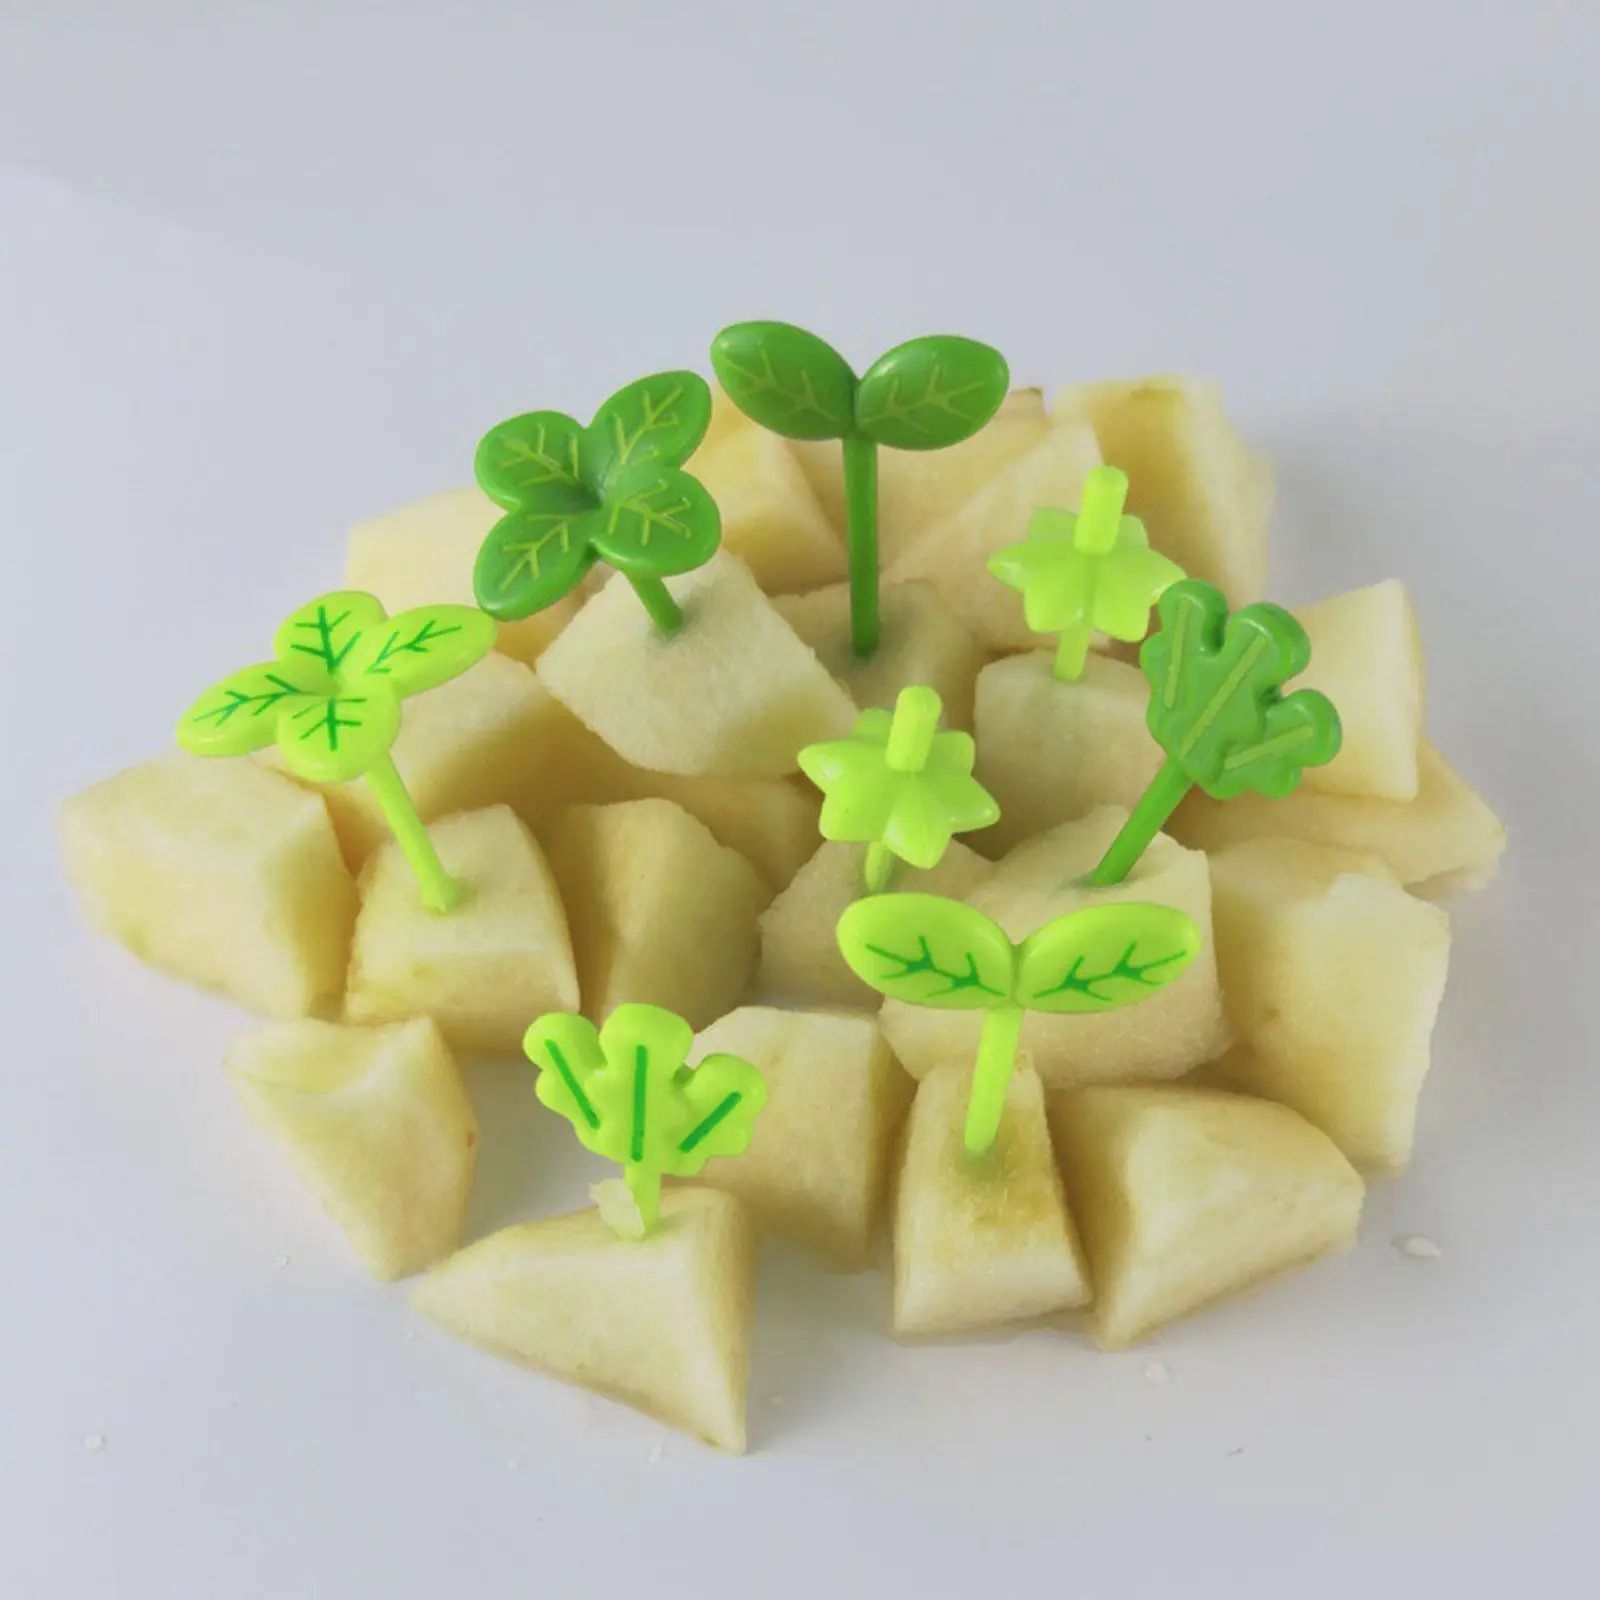 

8pcs Fruit Fork Toothpick Leaves Plastic Decoration Lunch Box Bento Accessories Small Salad Tiny Fork Mini Cake Picks For Kids